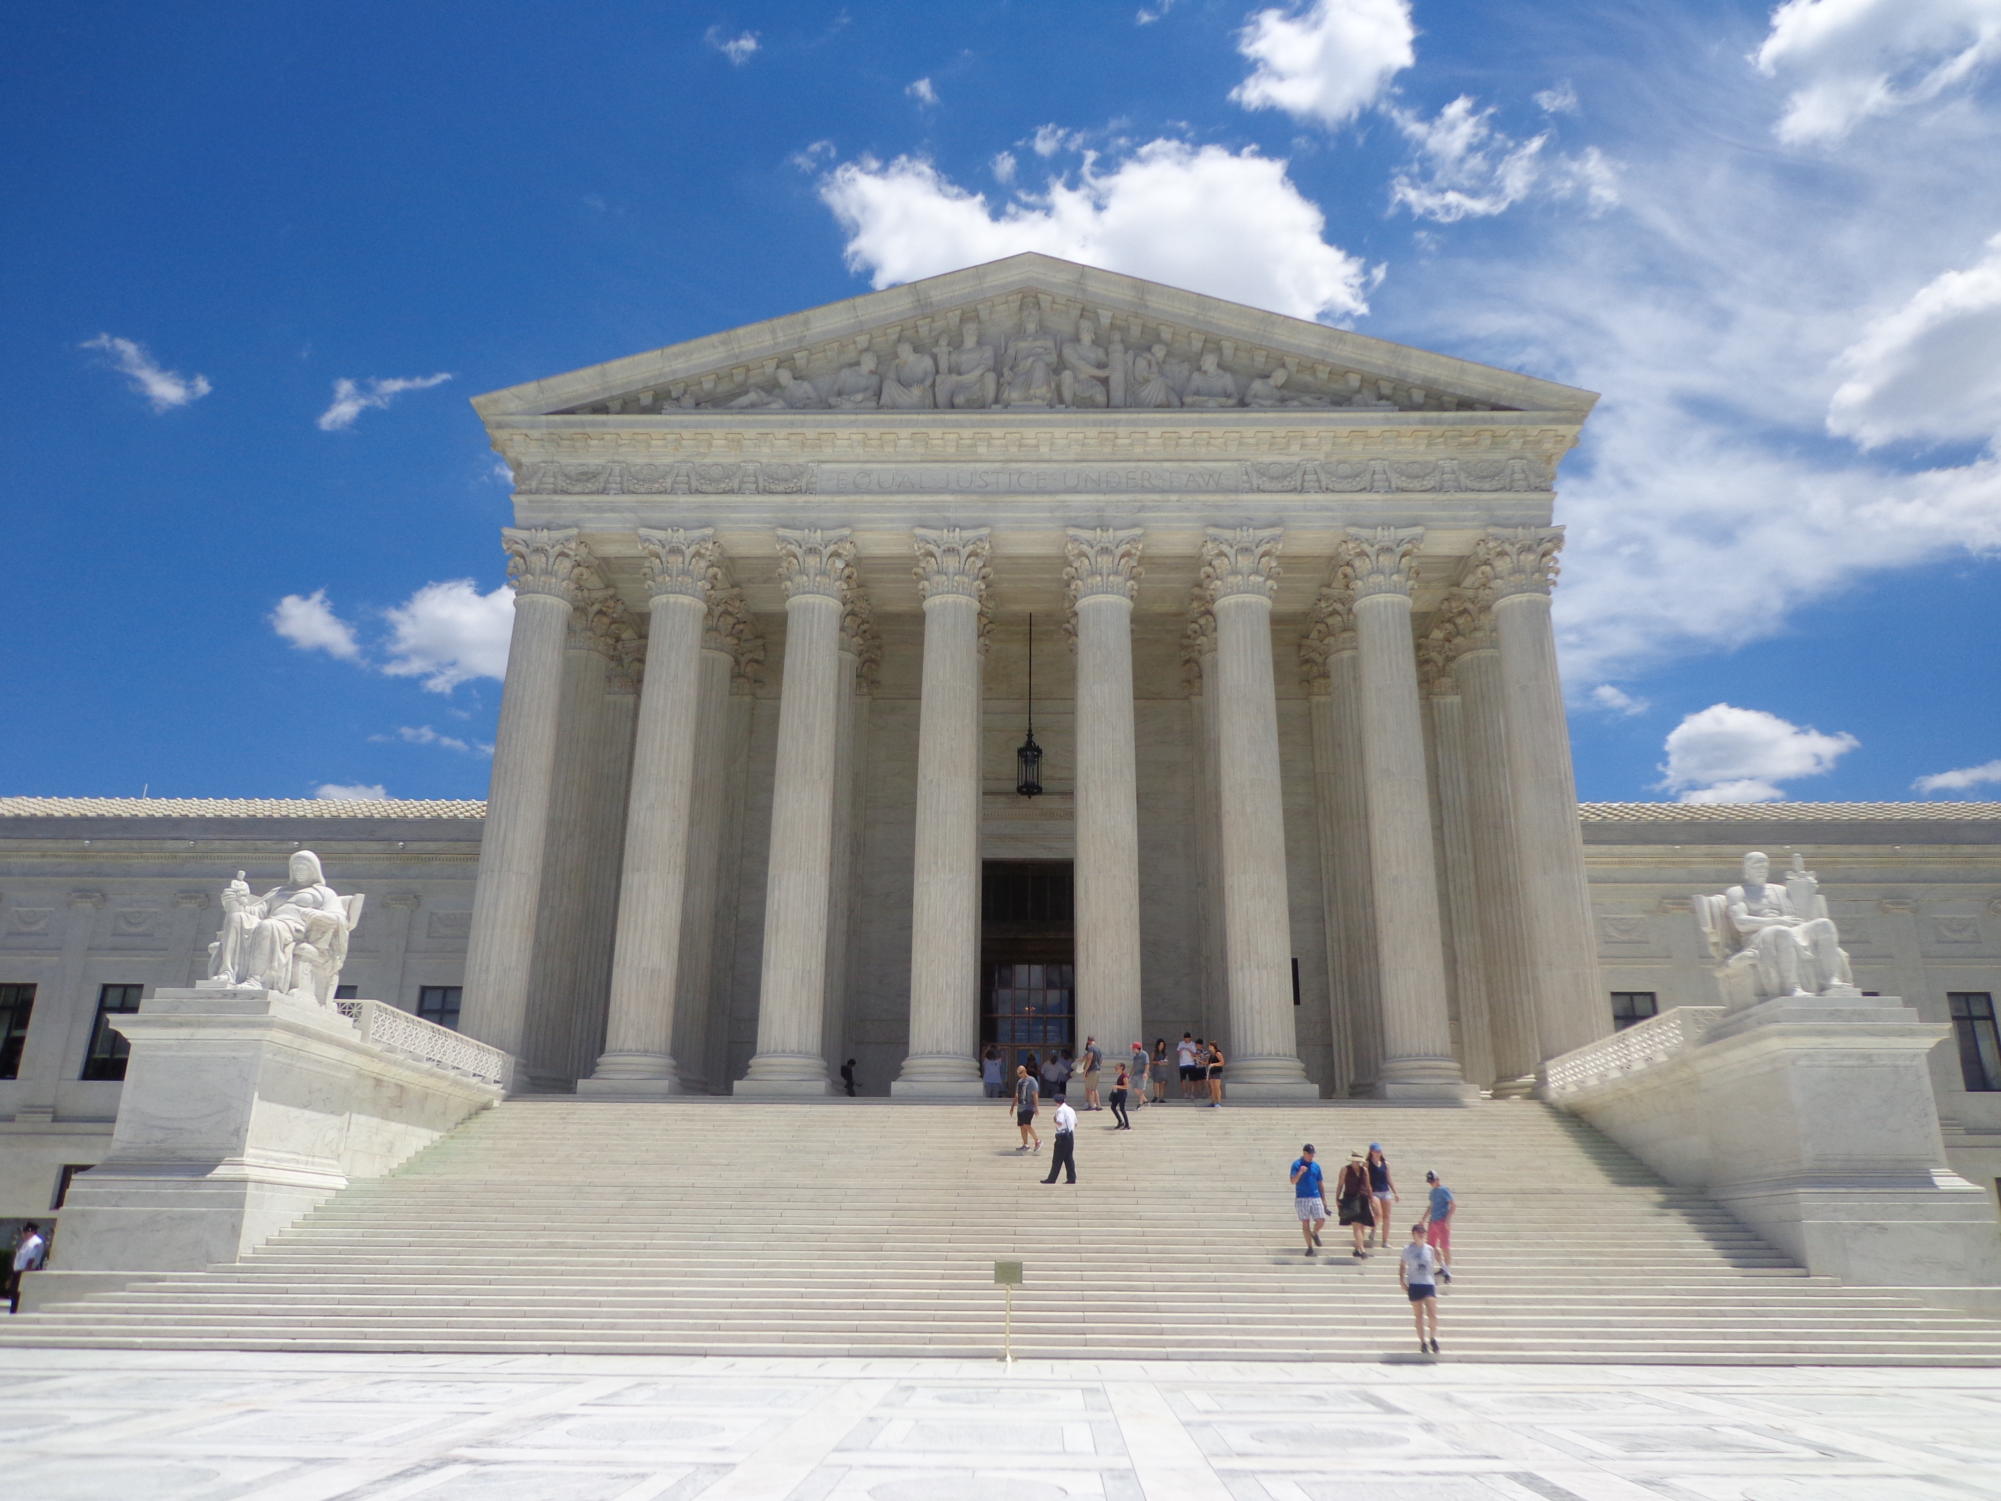 The Supreme Court struck down affirmative action last June in a 6-3 vote.